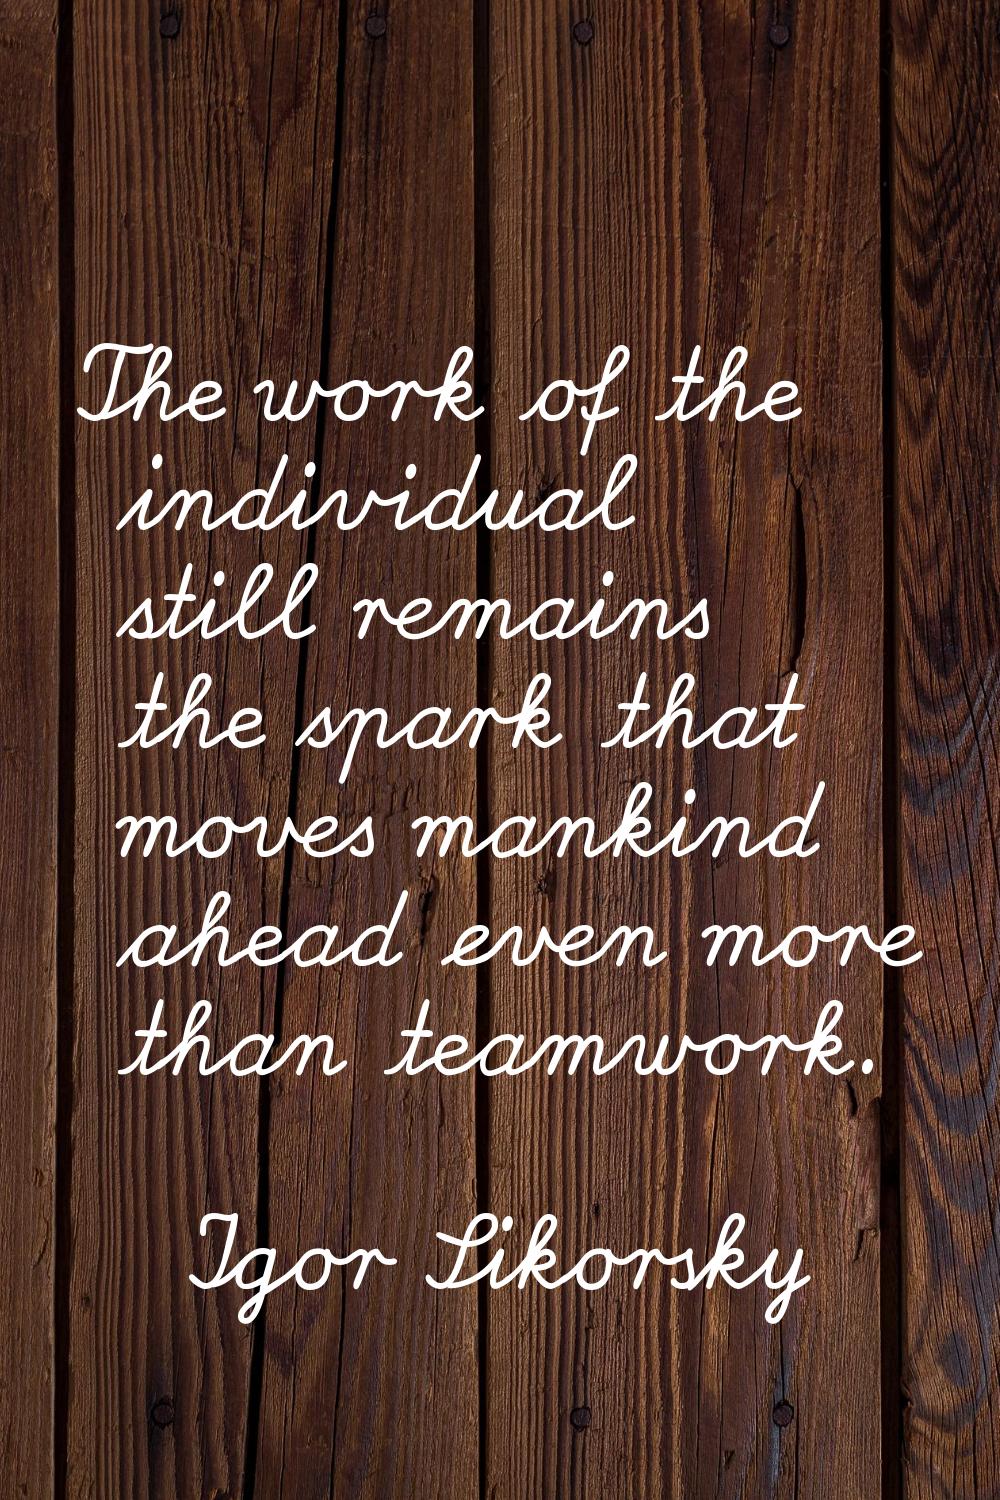 The work of the individual still remains the spark that moves mankind ahead even more than teamwork